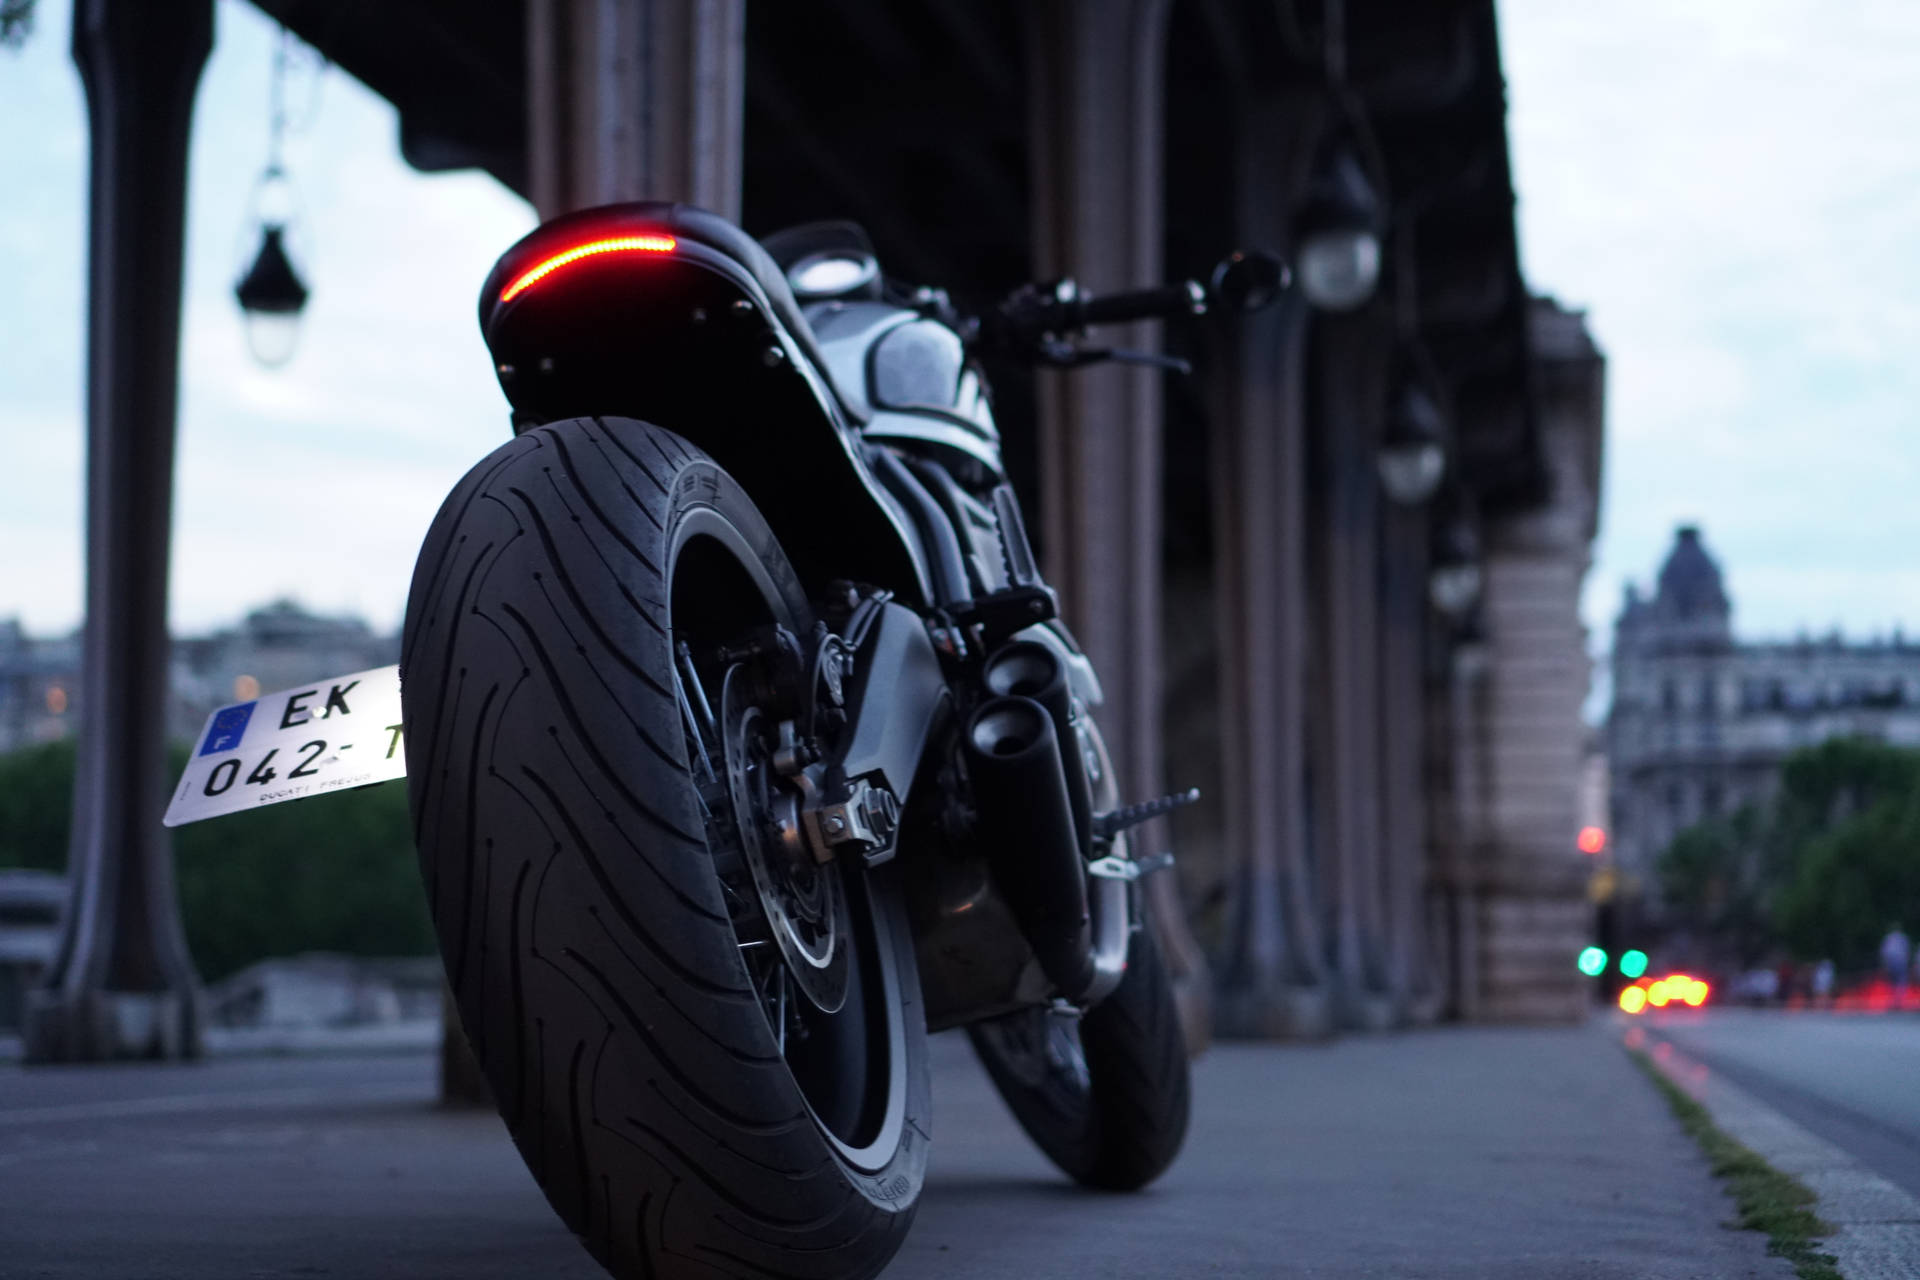 Showing Off Its Power And Beauty, This Black Ducati Turns Heads In The City.